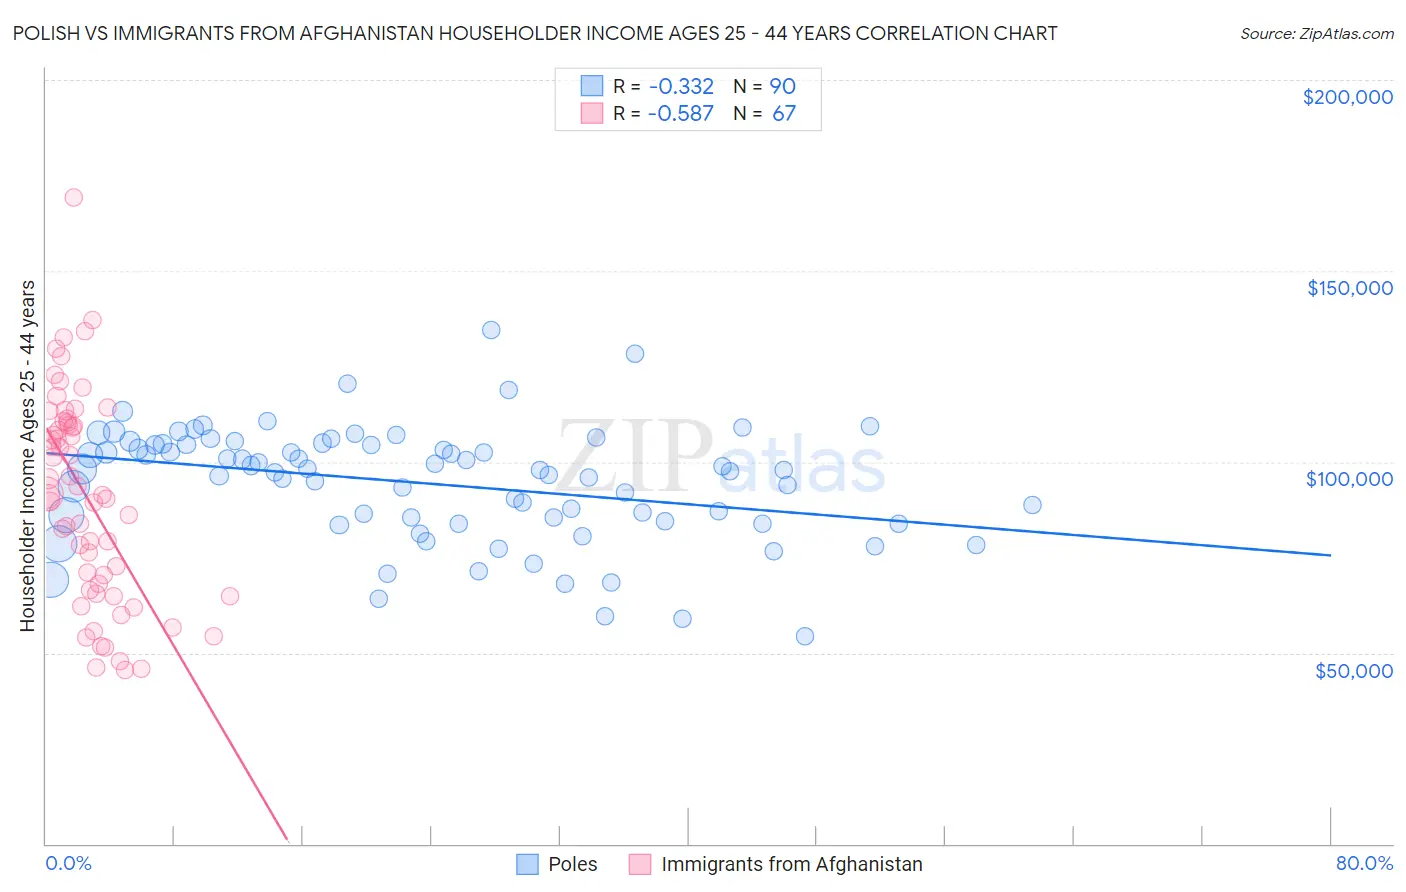 Polish vs Immigrants from Afghanistan Householder Income Ages 25 - 44 years